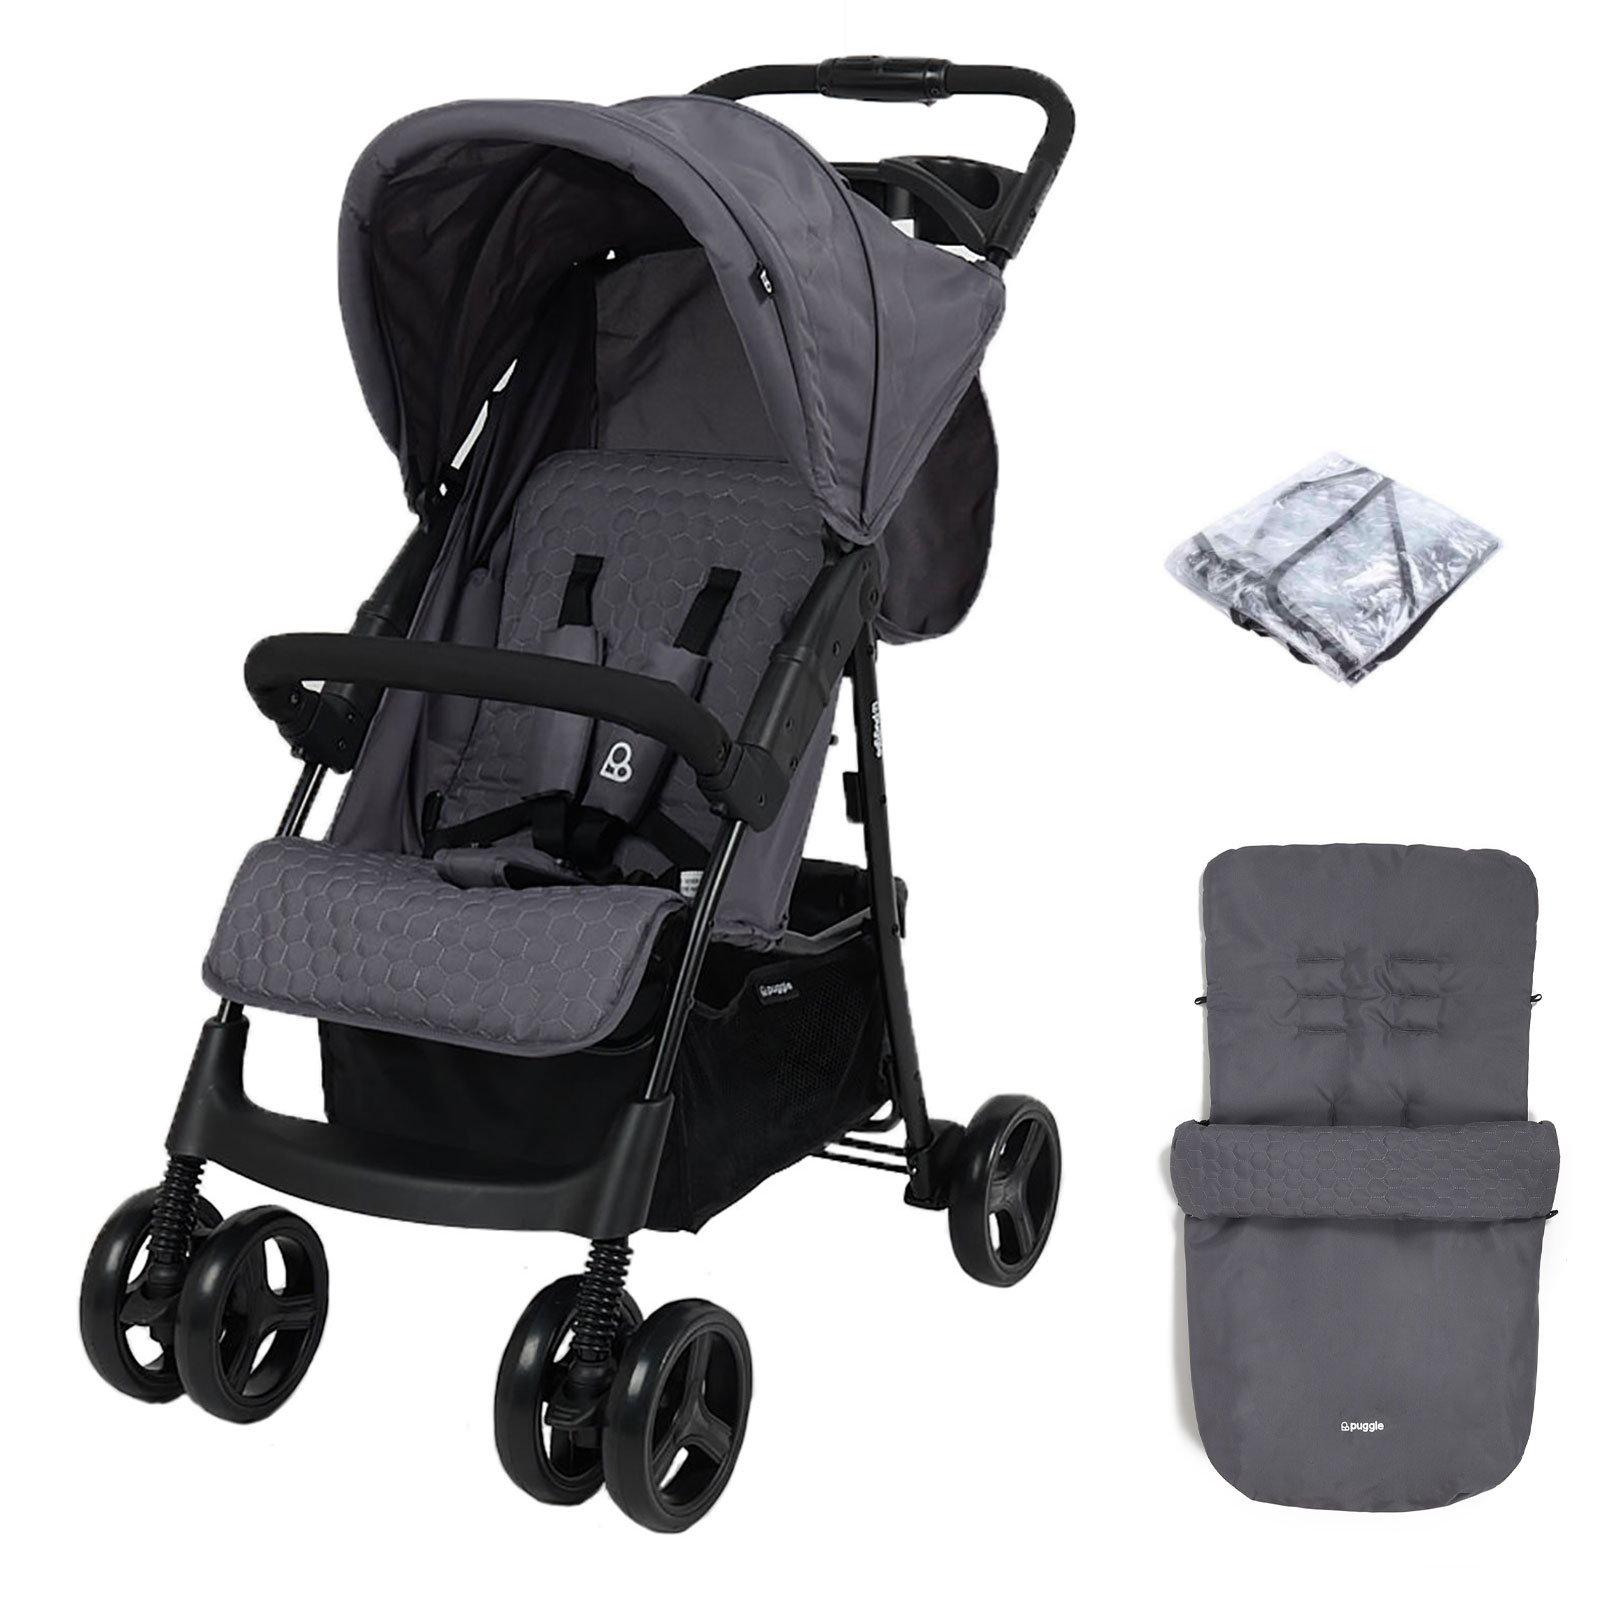 Puggle Starmax Pushchair Stroller with Raincover and Universal Footmuff – Slate Grey